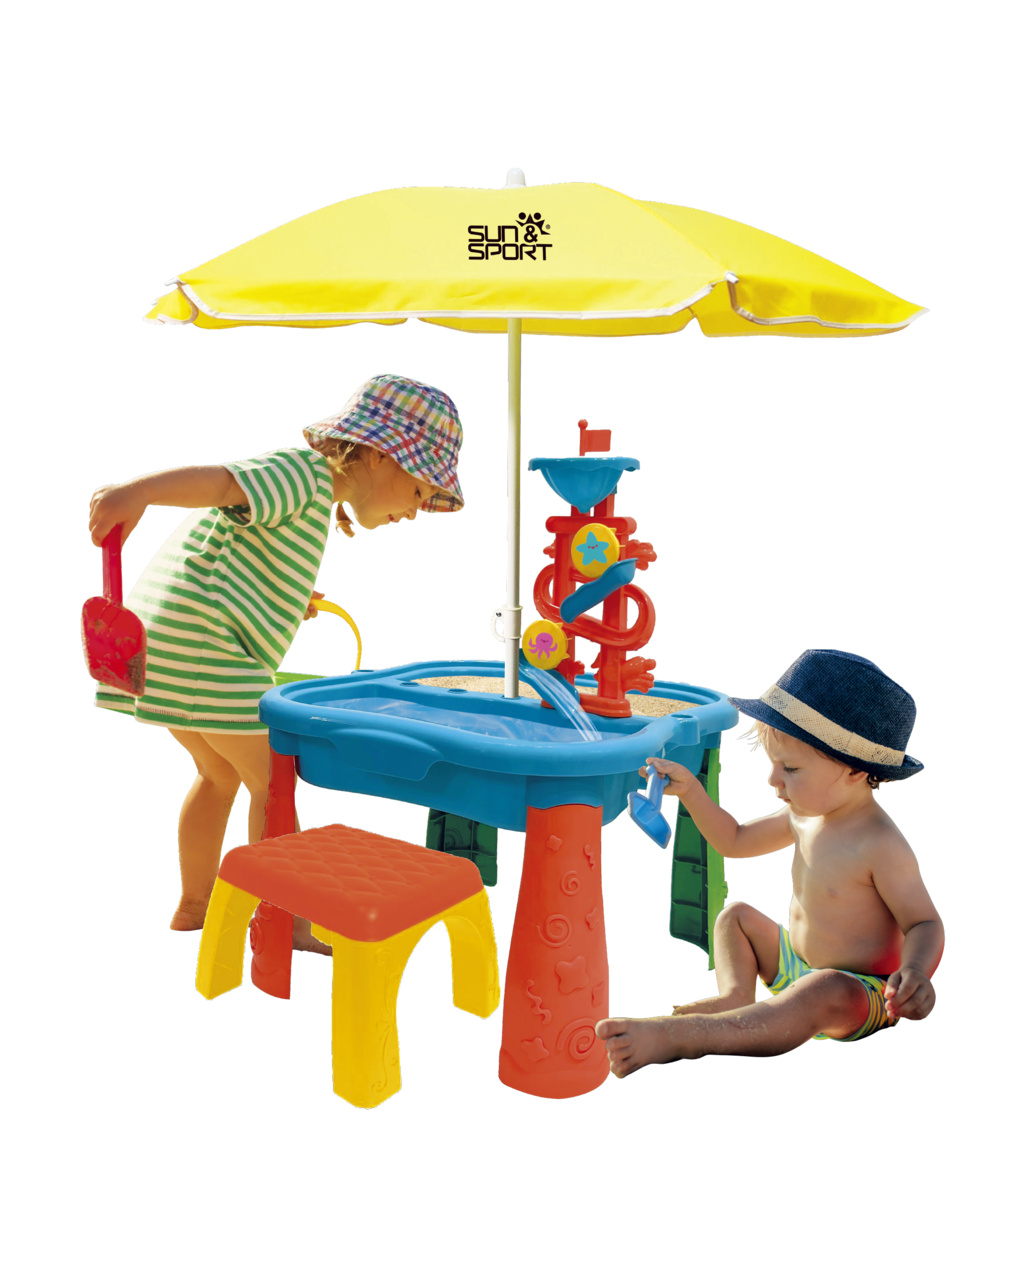 Game table happy summer - sun&sport